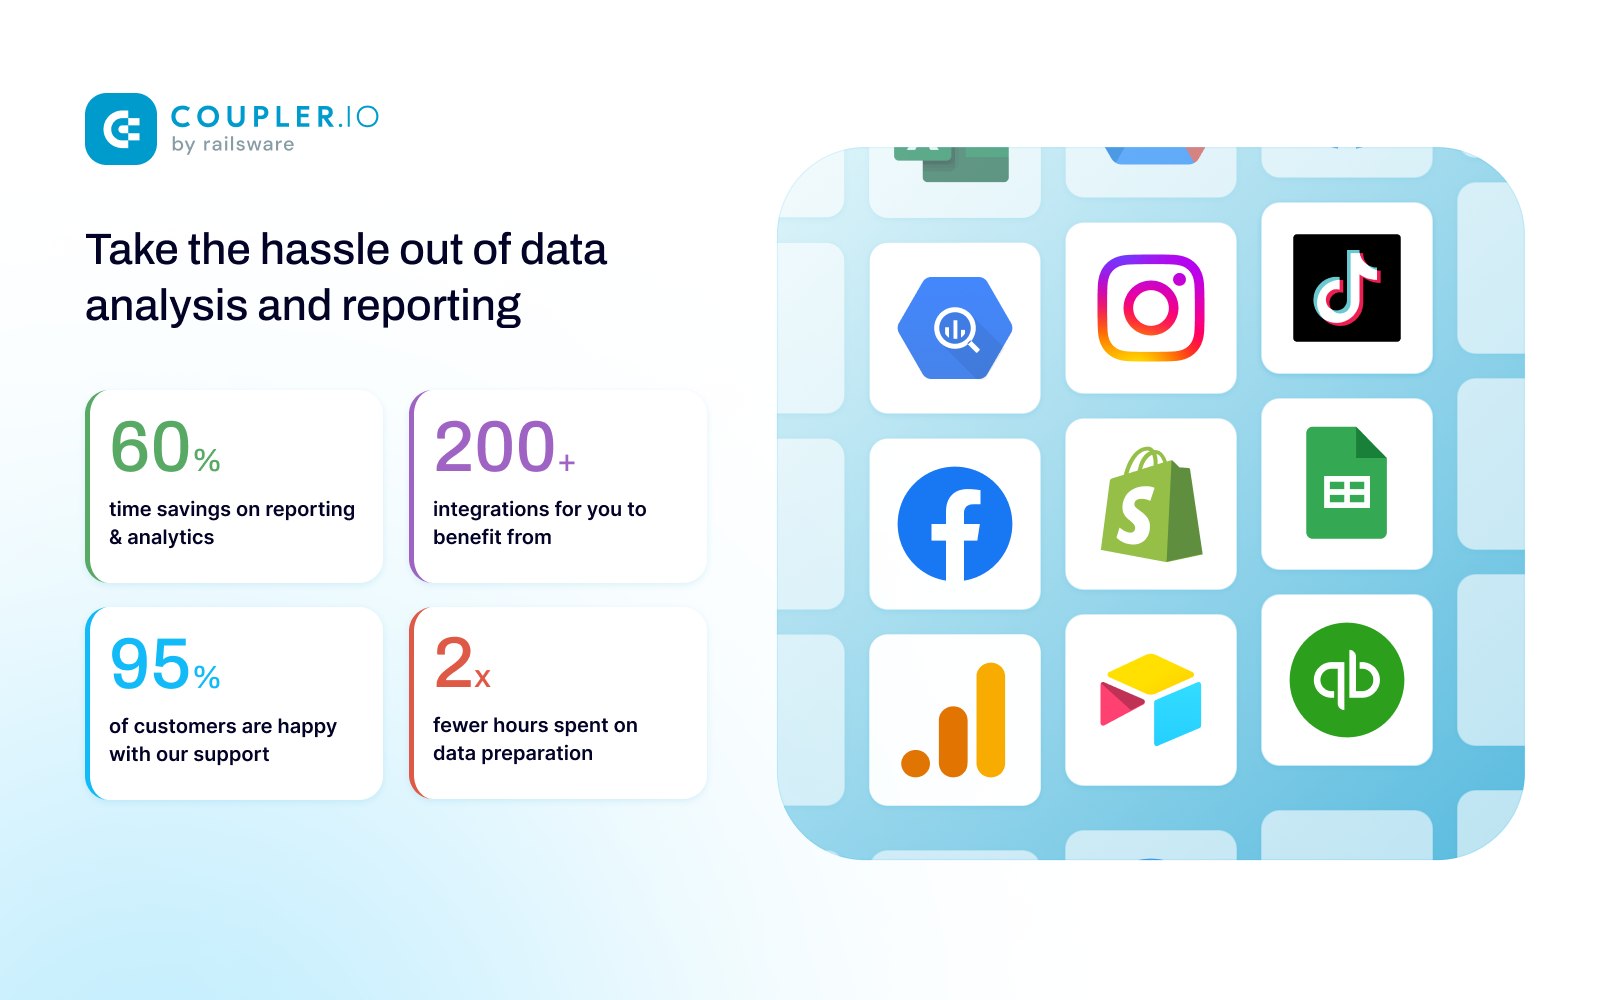 Take the hassle out of data analysis and reporting